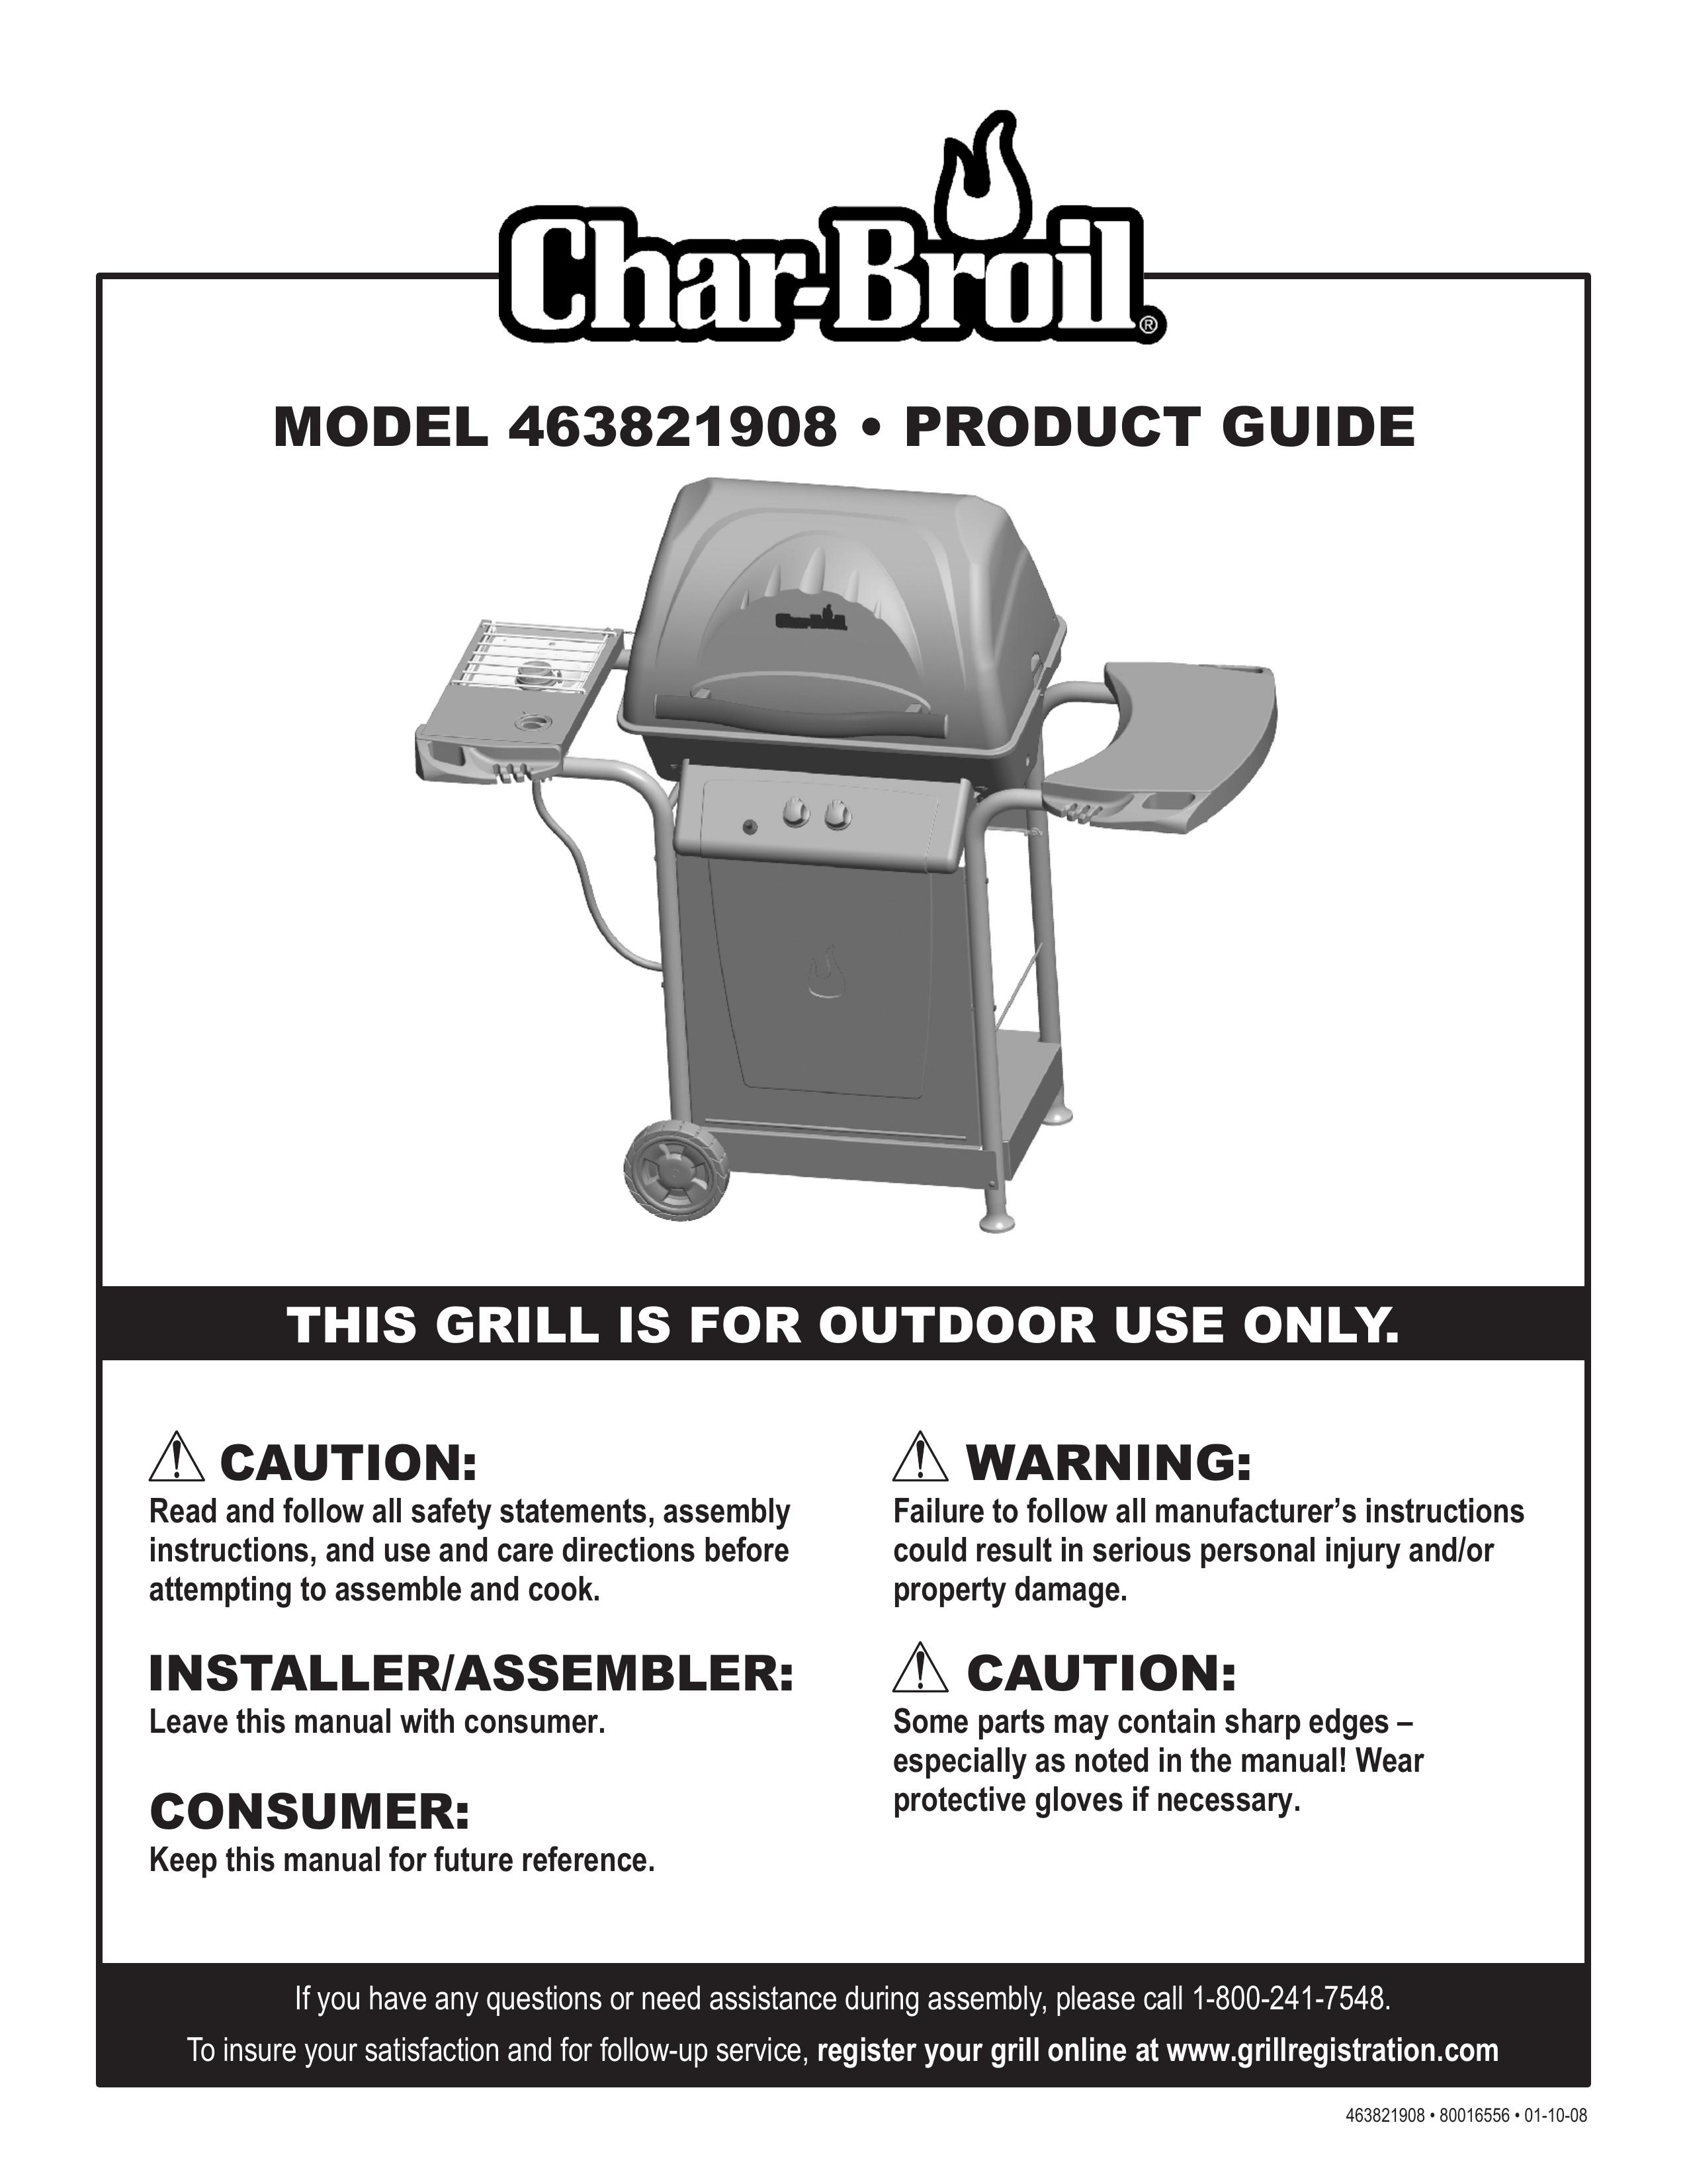 Char-Broil 463821908 Gas Grill User Manual